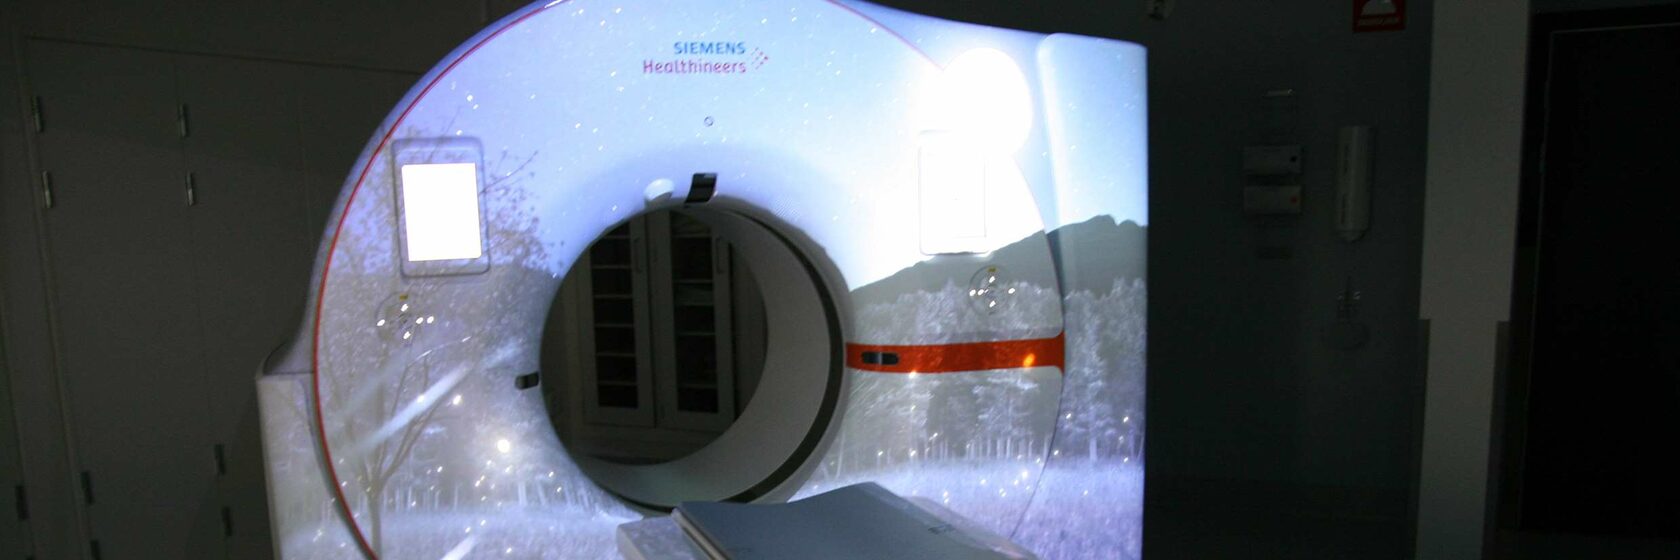 IMMERSIVE PROJECTION CALMS CHILDREN DURING CT SCANS AT SWEDISH HOSPITALS 6